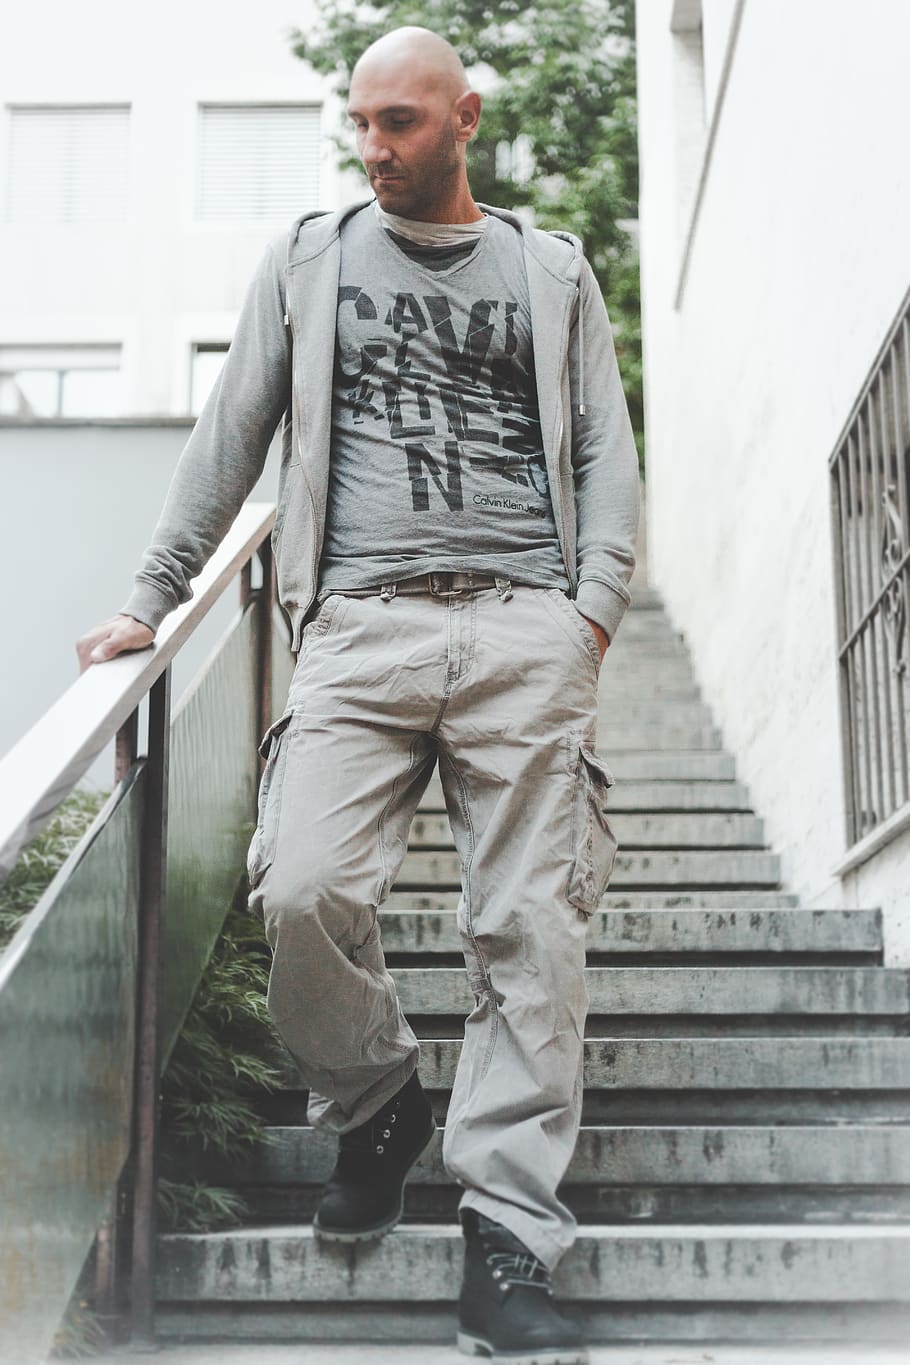 Photo of Man Wearing Grey Zip-up Jacket and Brown Cargo Pants Walking Down on Concrete Stairs, HD wallpaper